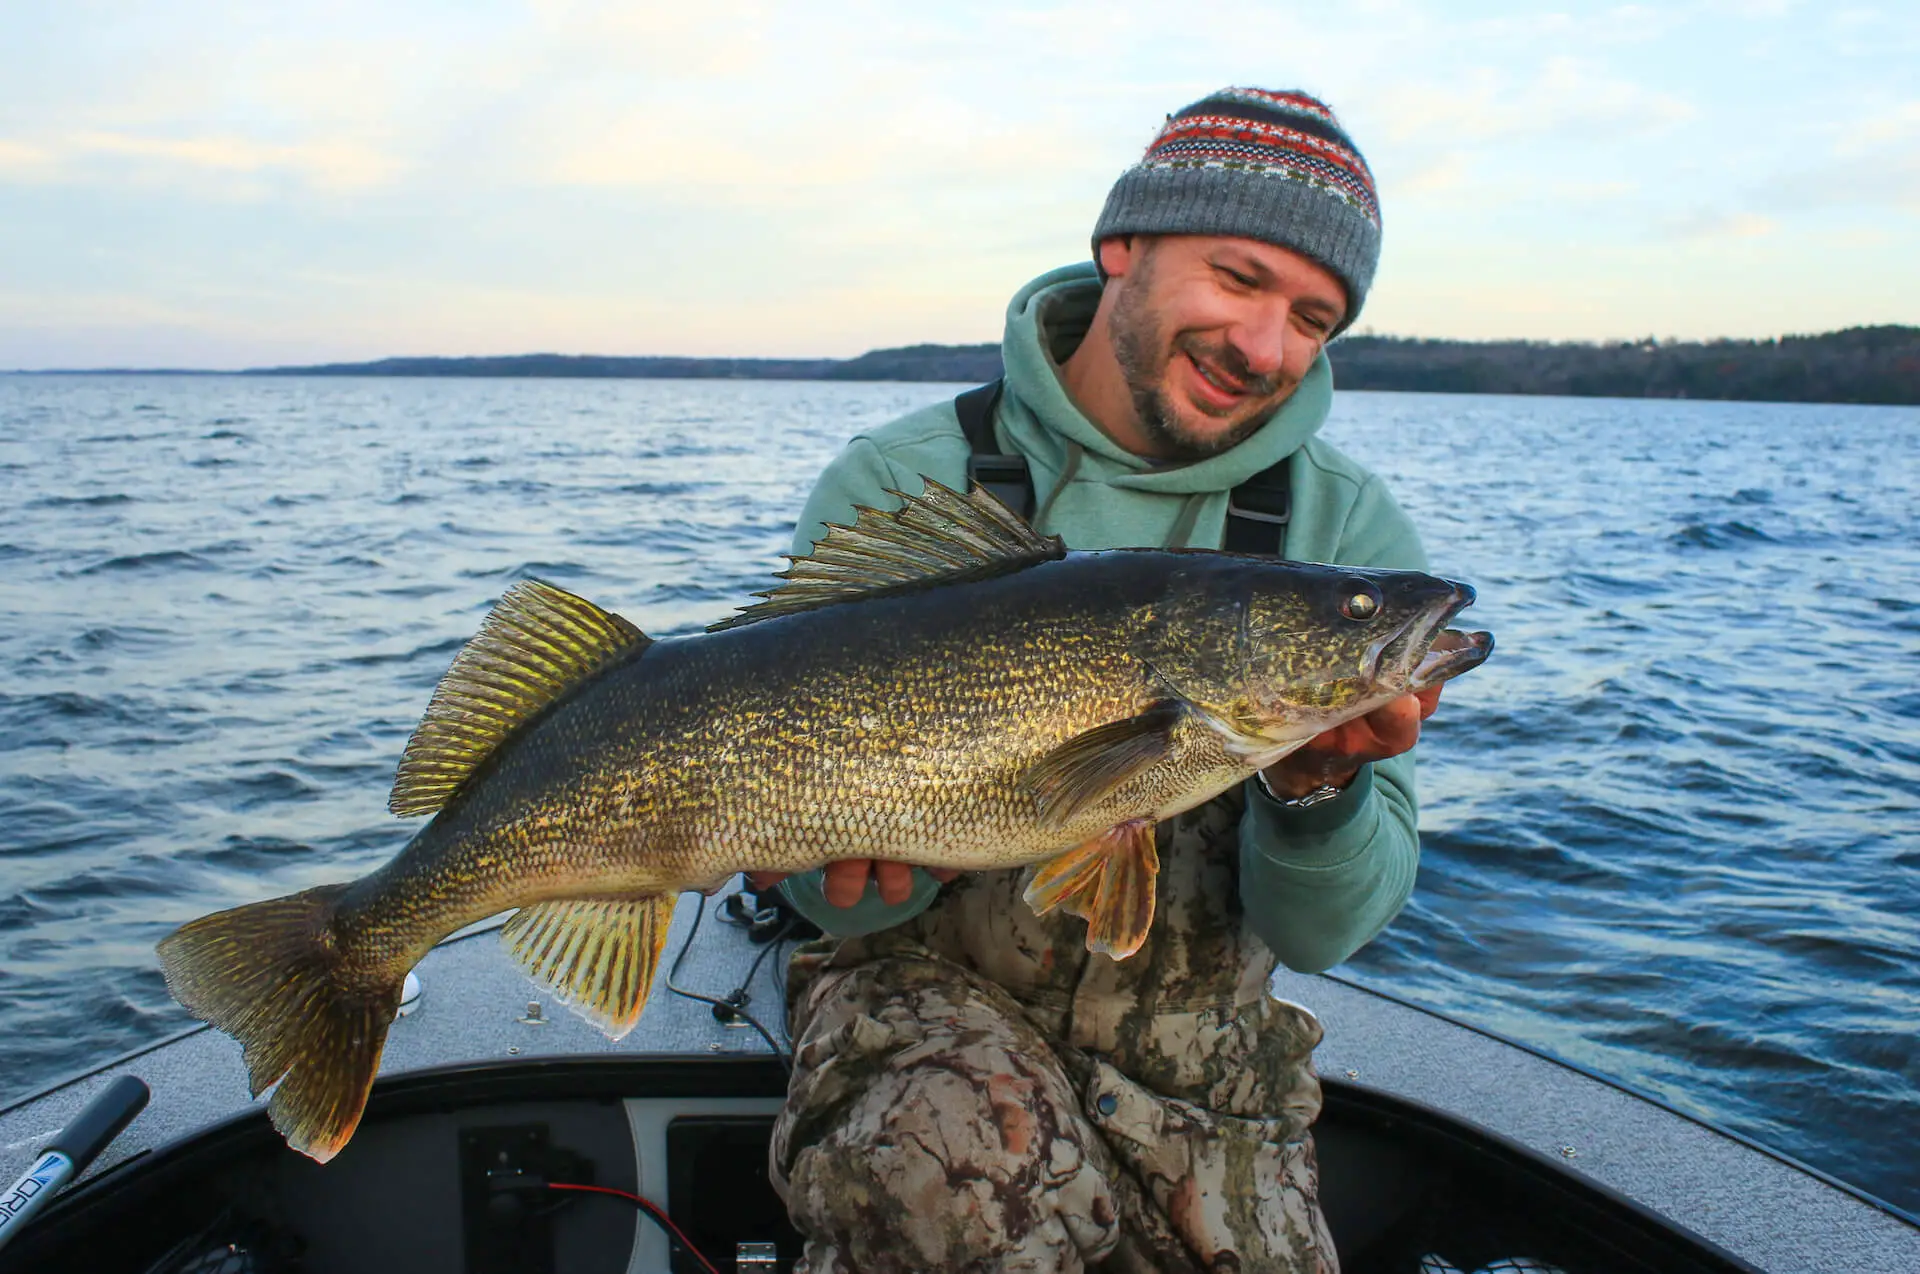 Best Walleye Rods Review: Are Walleye Good to Eat?